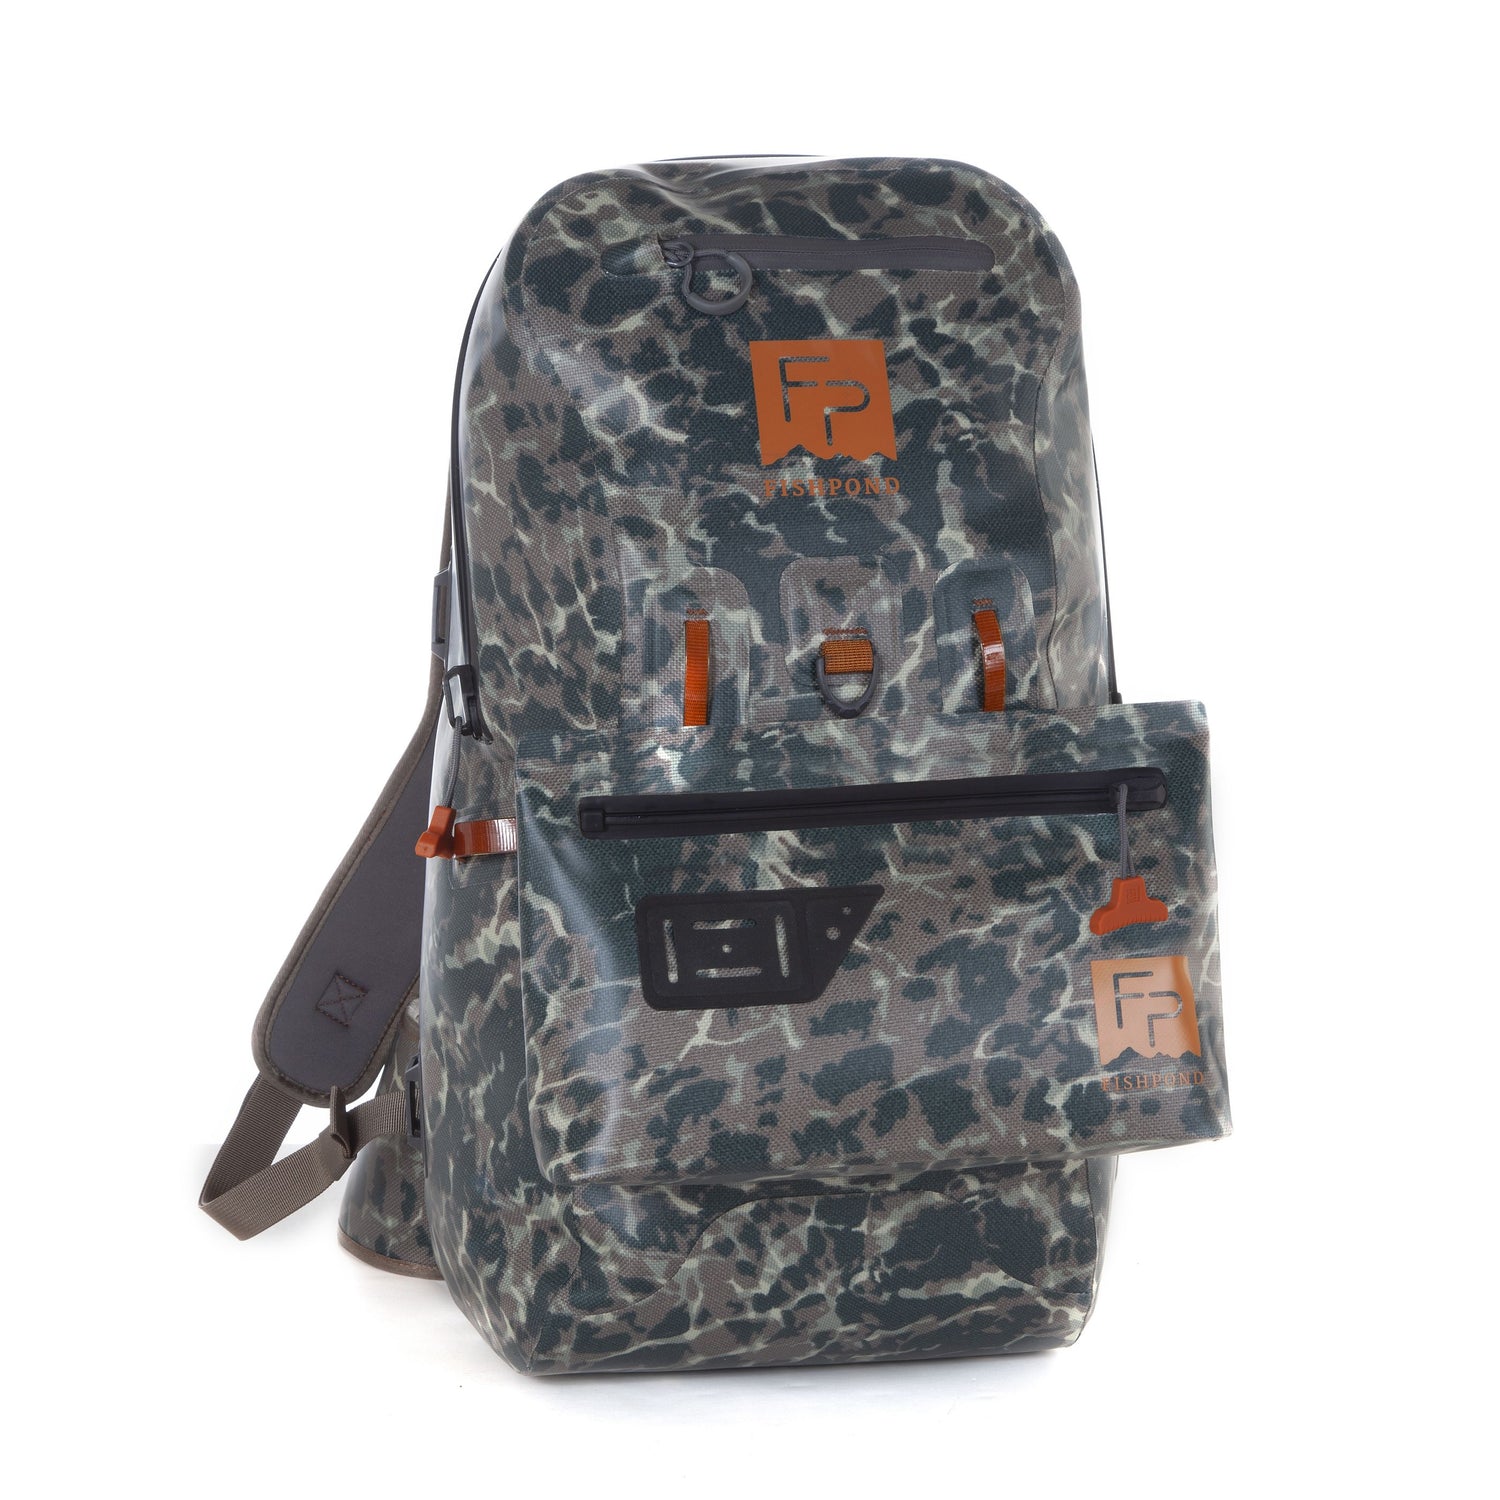 Fishpond Thunderhead Submersible Pouch - Eco - Riverbed Camo